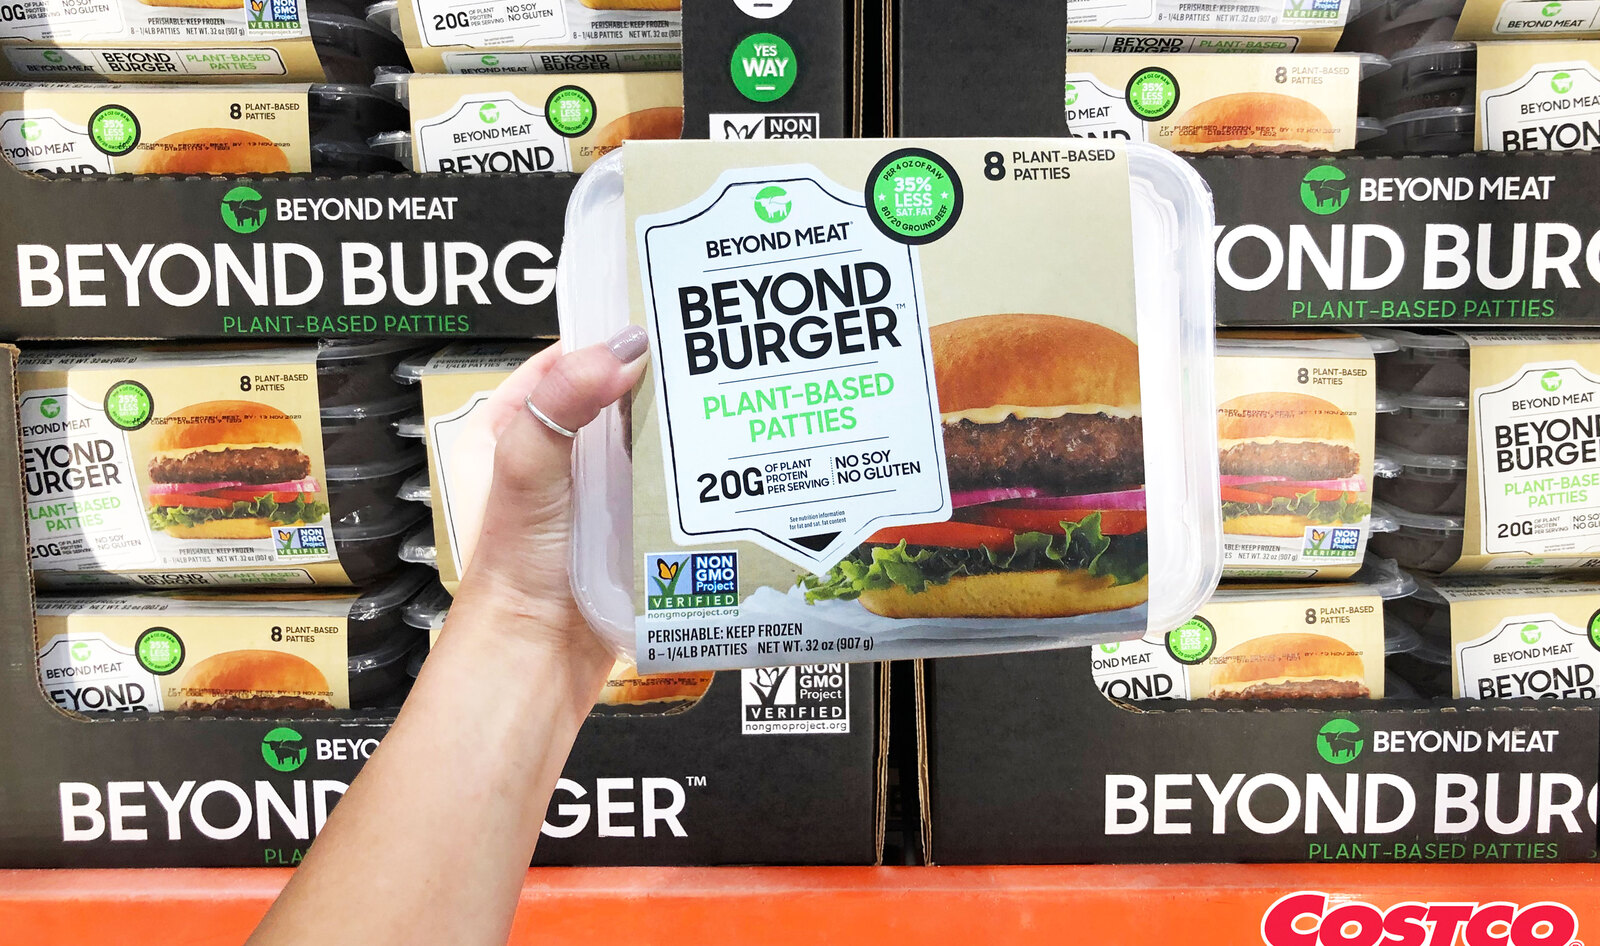 These 18 Vegan Costco Products Will Have You Signing up For a Membership ASAP&nbsp;&nbsp;